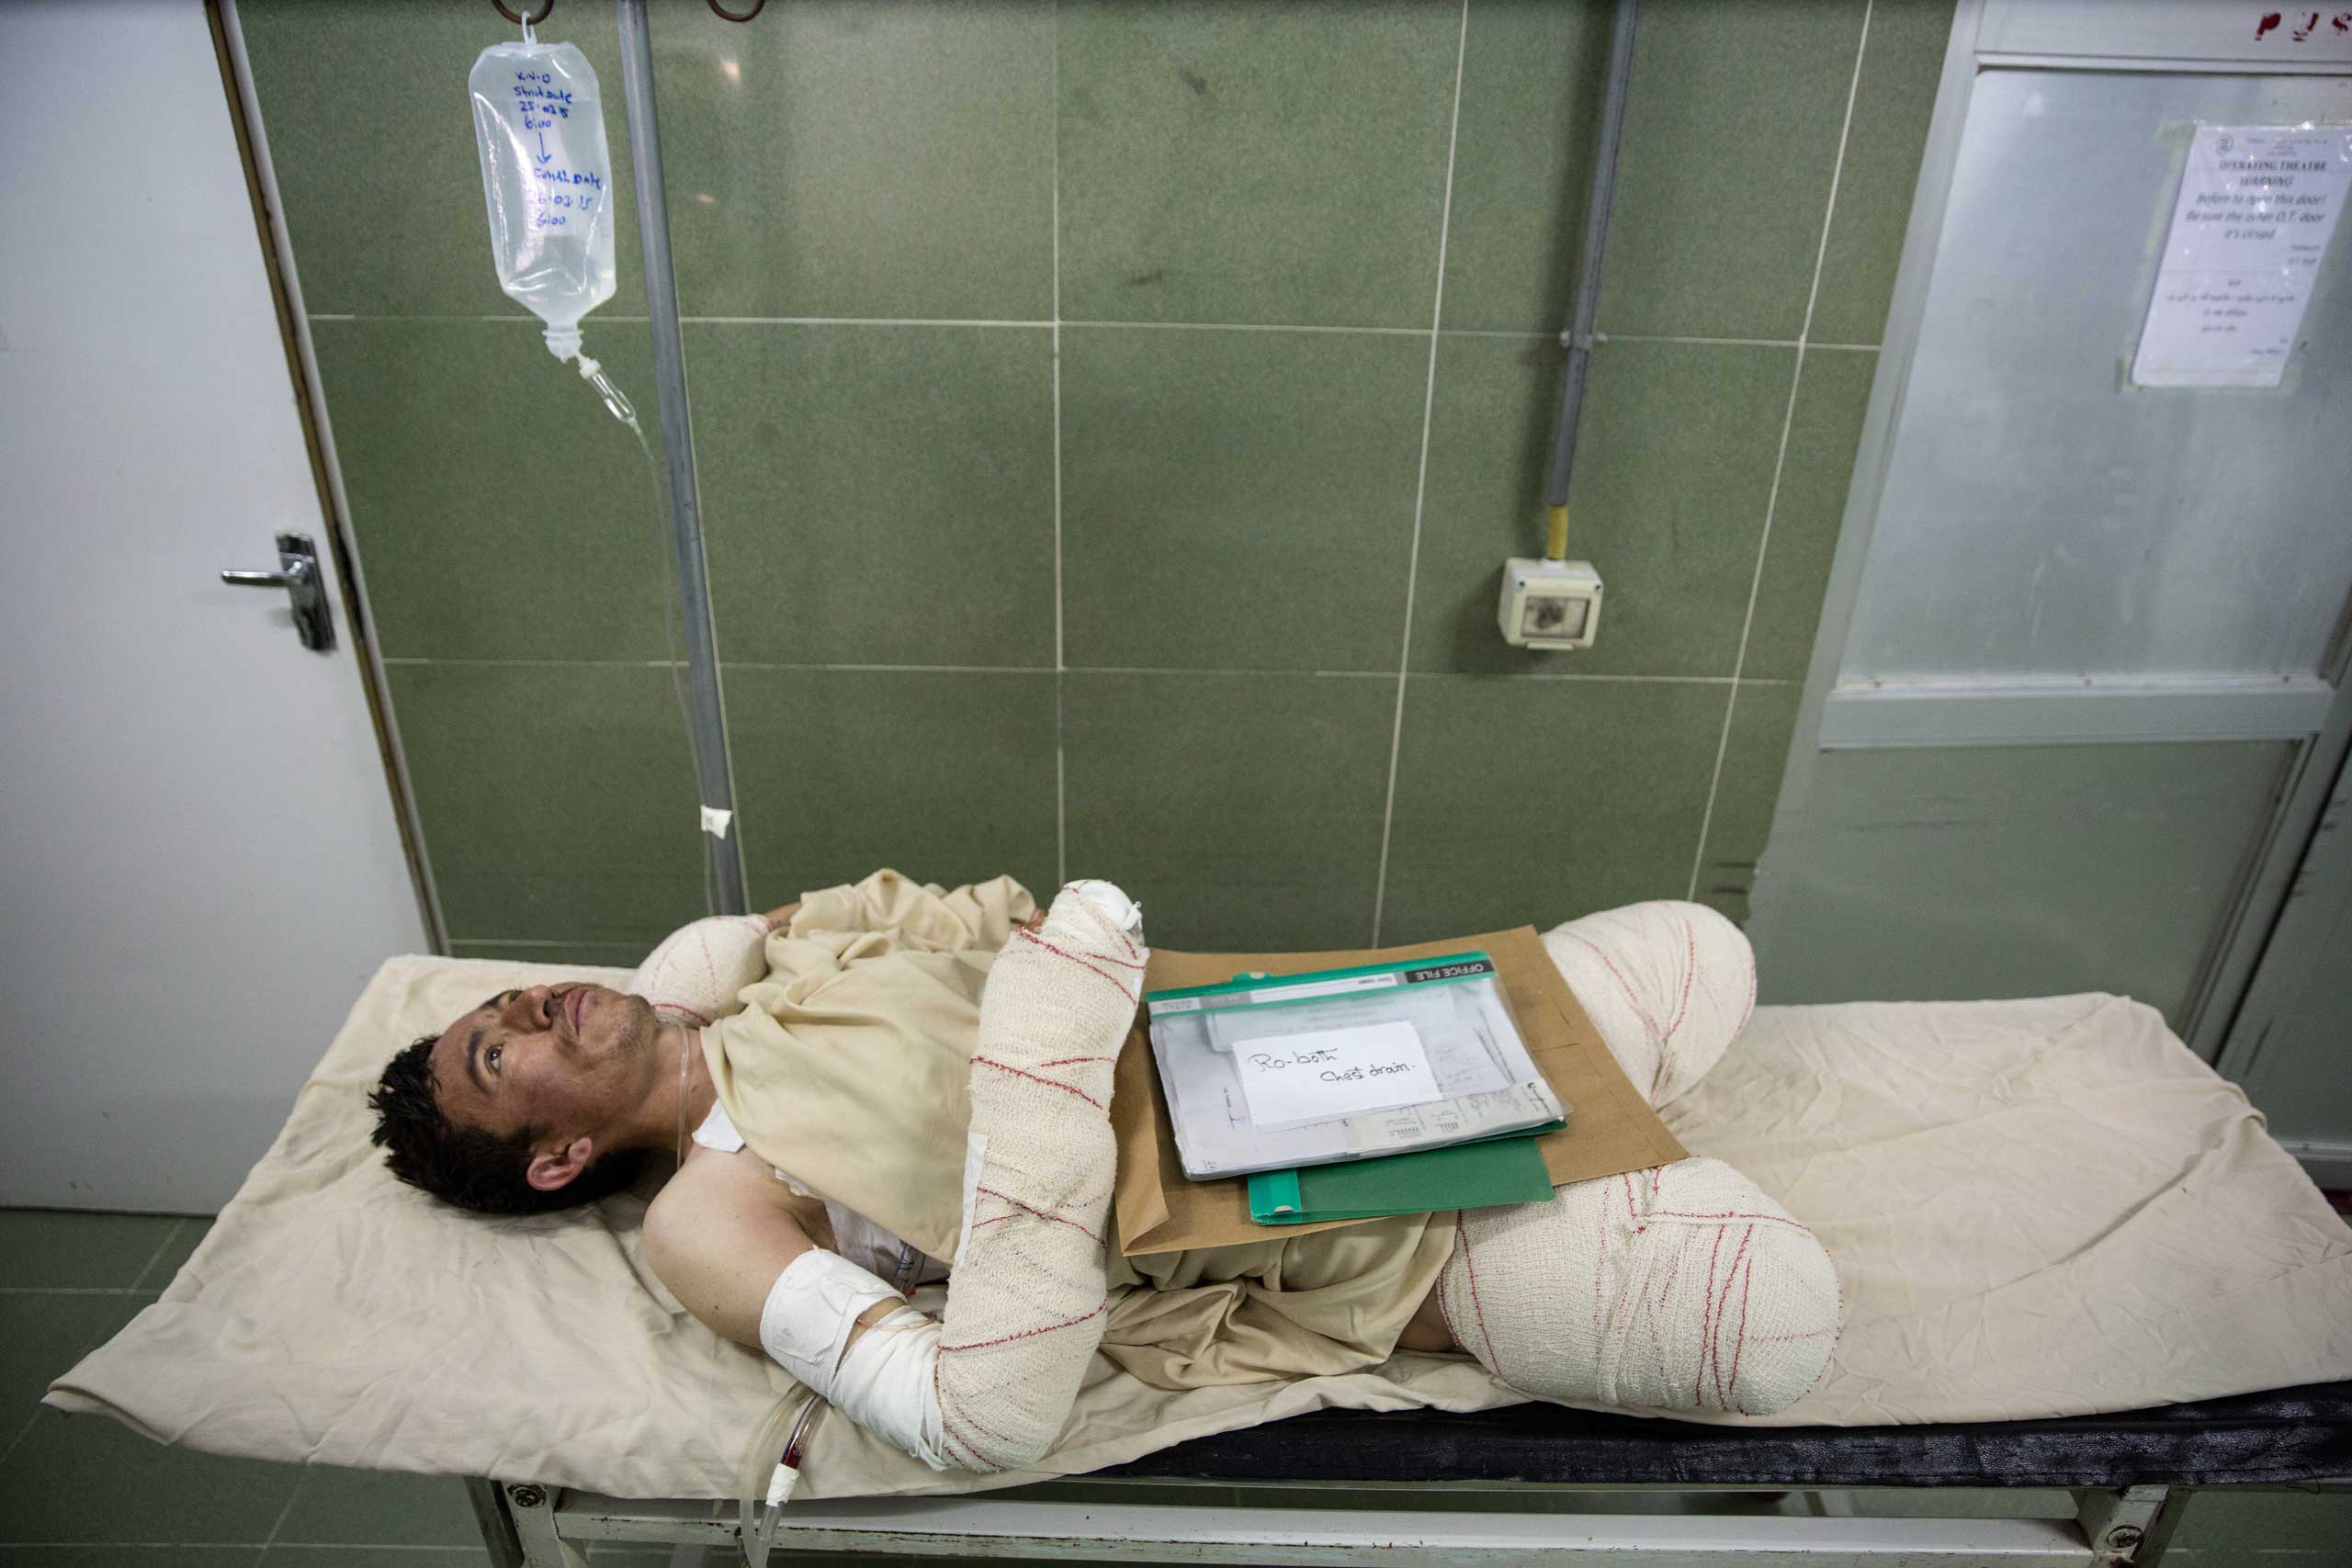 Sayed Malik, 25, waits to go into surgery. He lost his legs while demining, as a ANA soldier in Sangin. Lashkar Gah, Afghanistan on March 26, 2015.